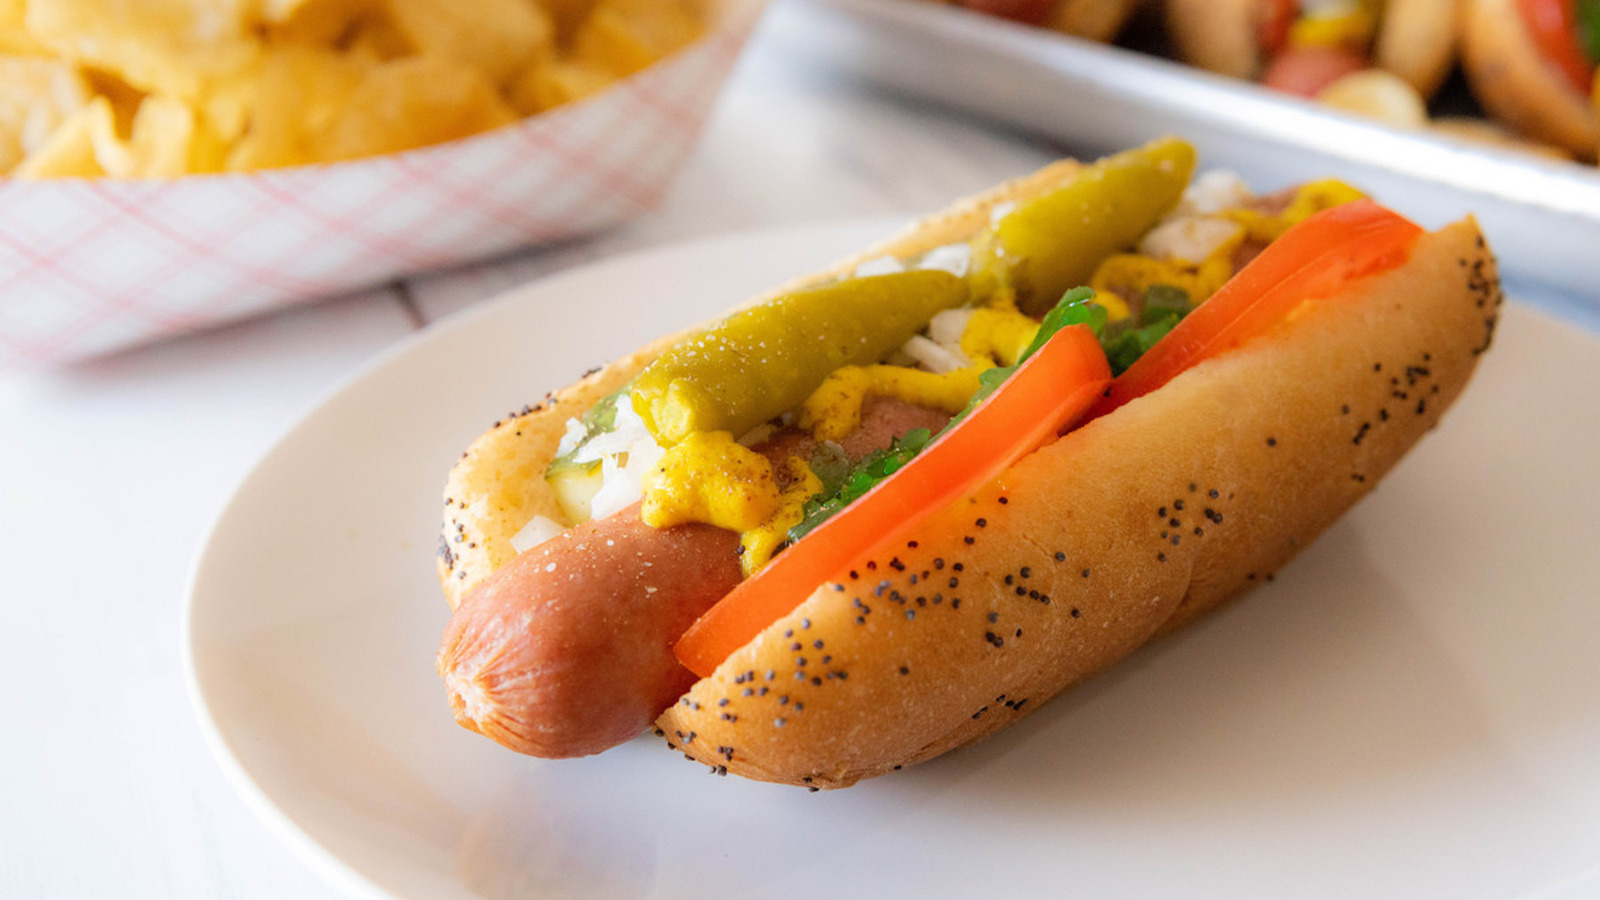 Chicago Style Hot Dogs Recipe